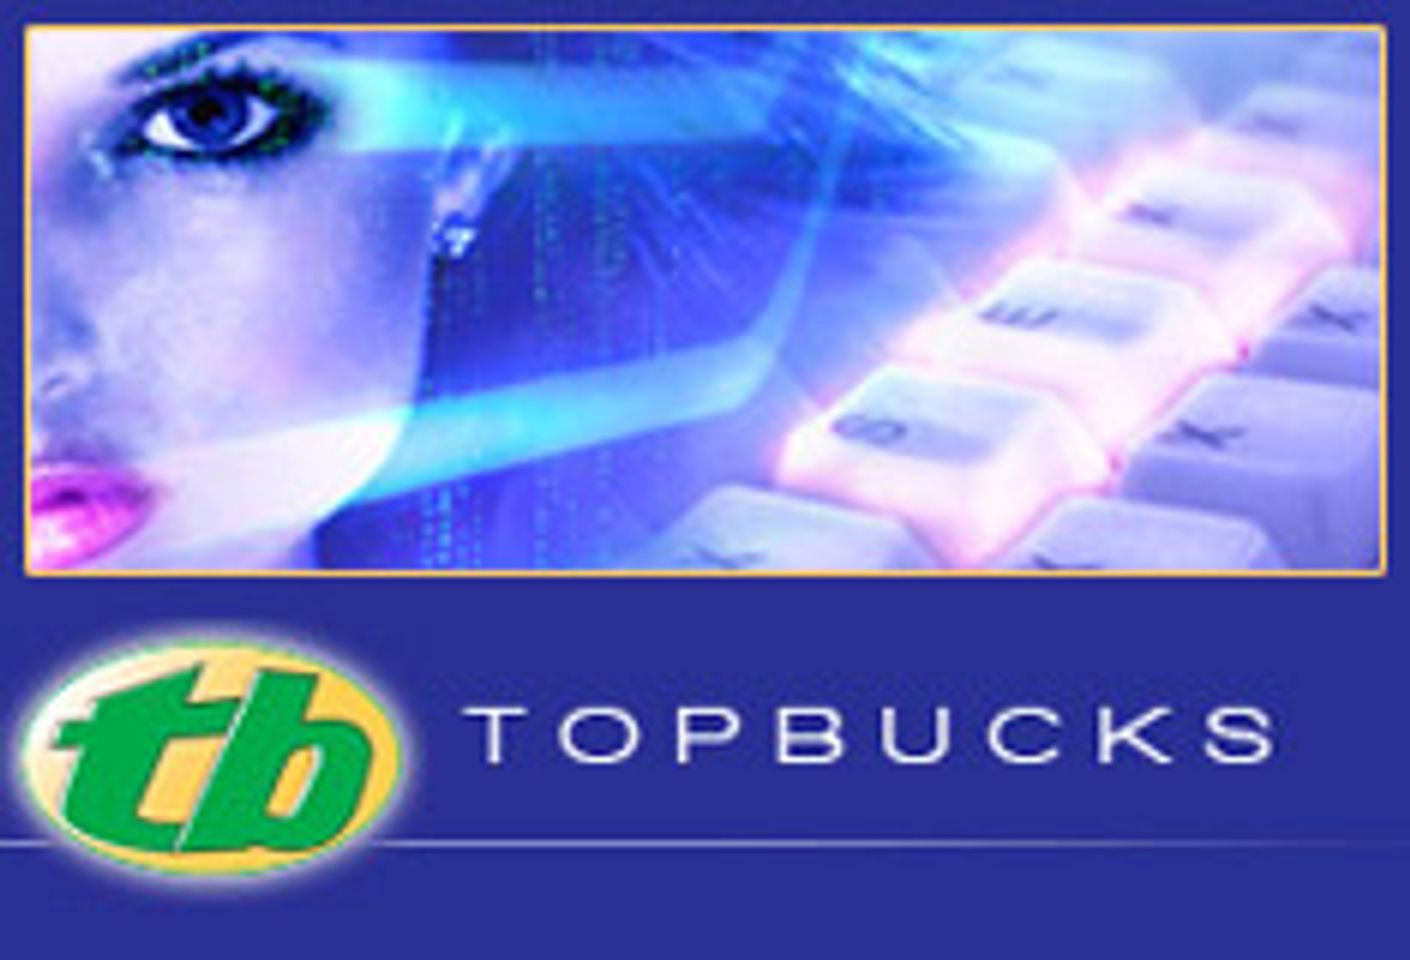 TopBucks Launches Two New Sites